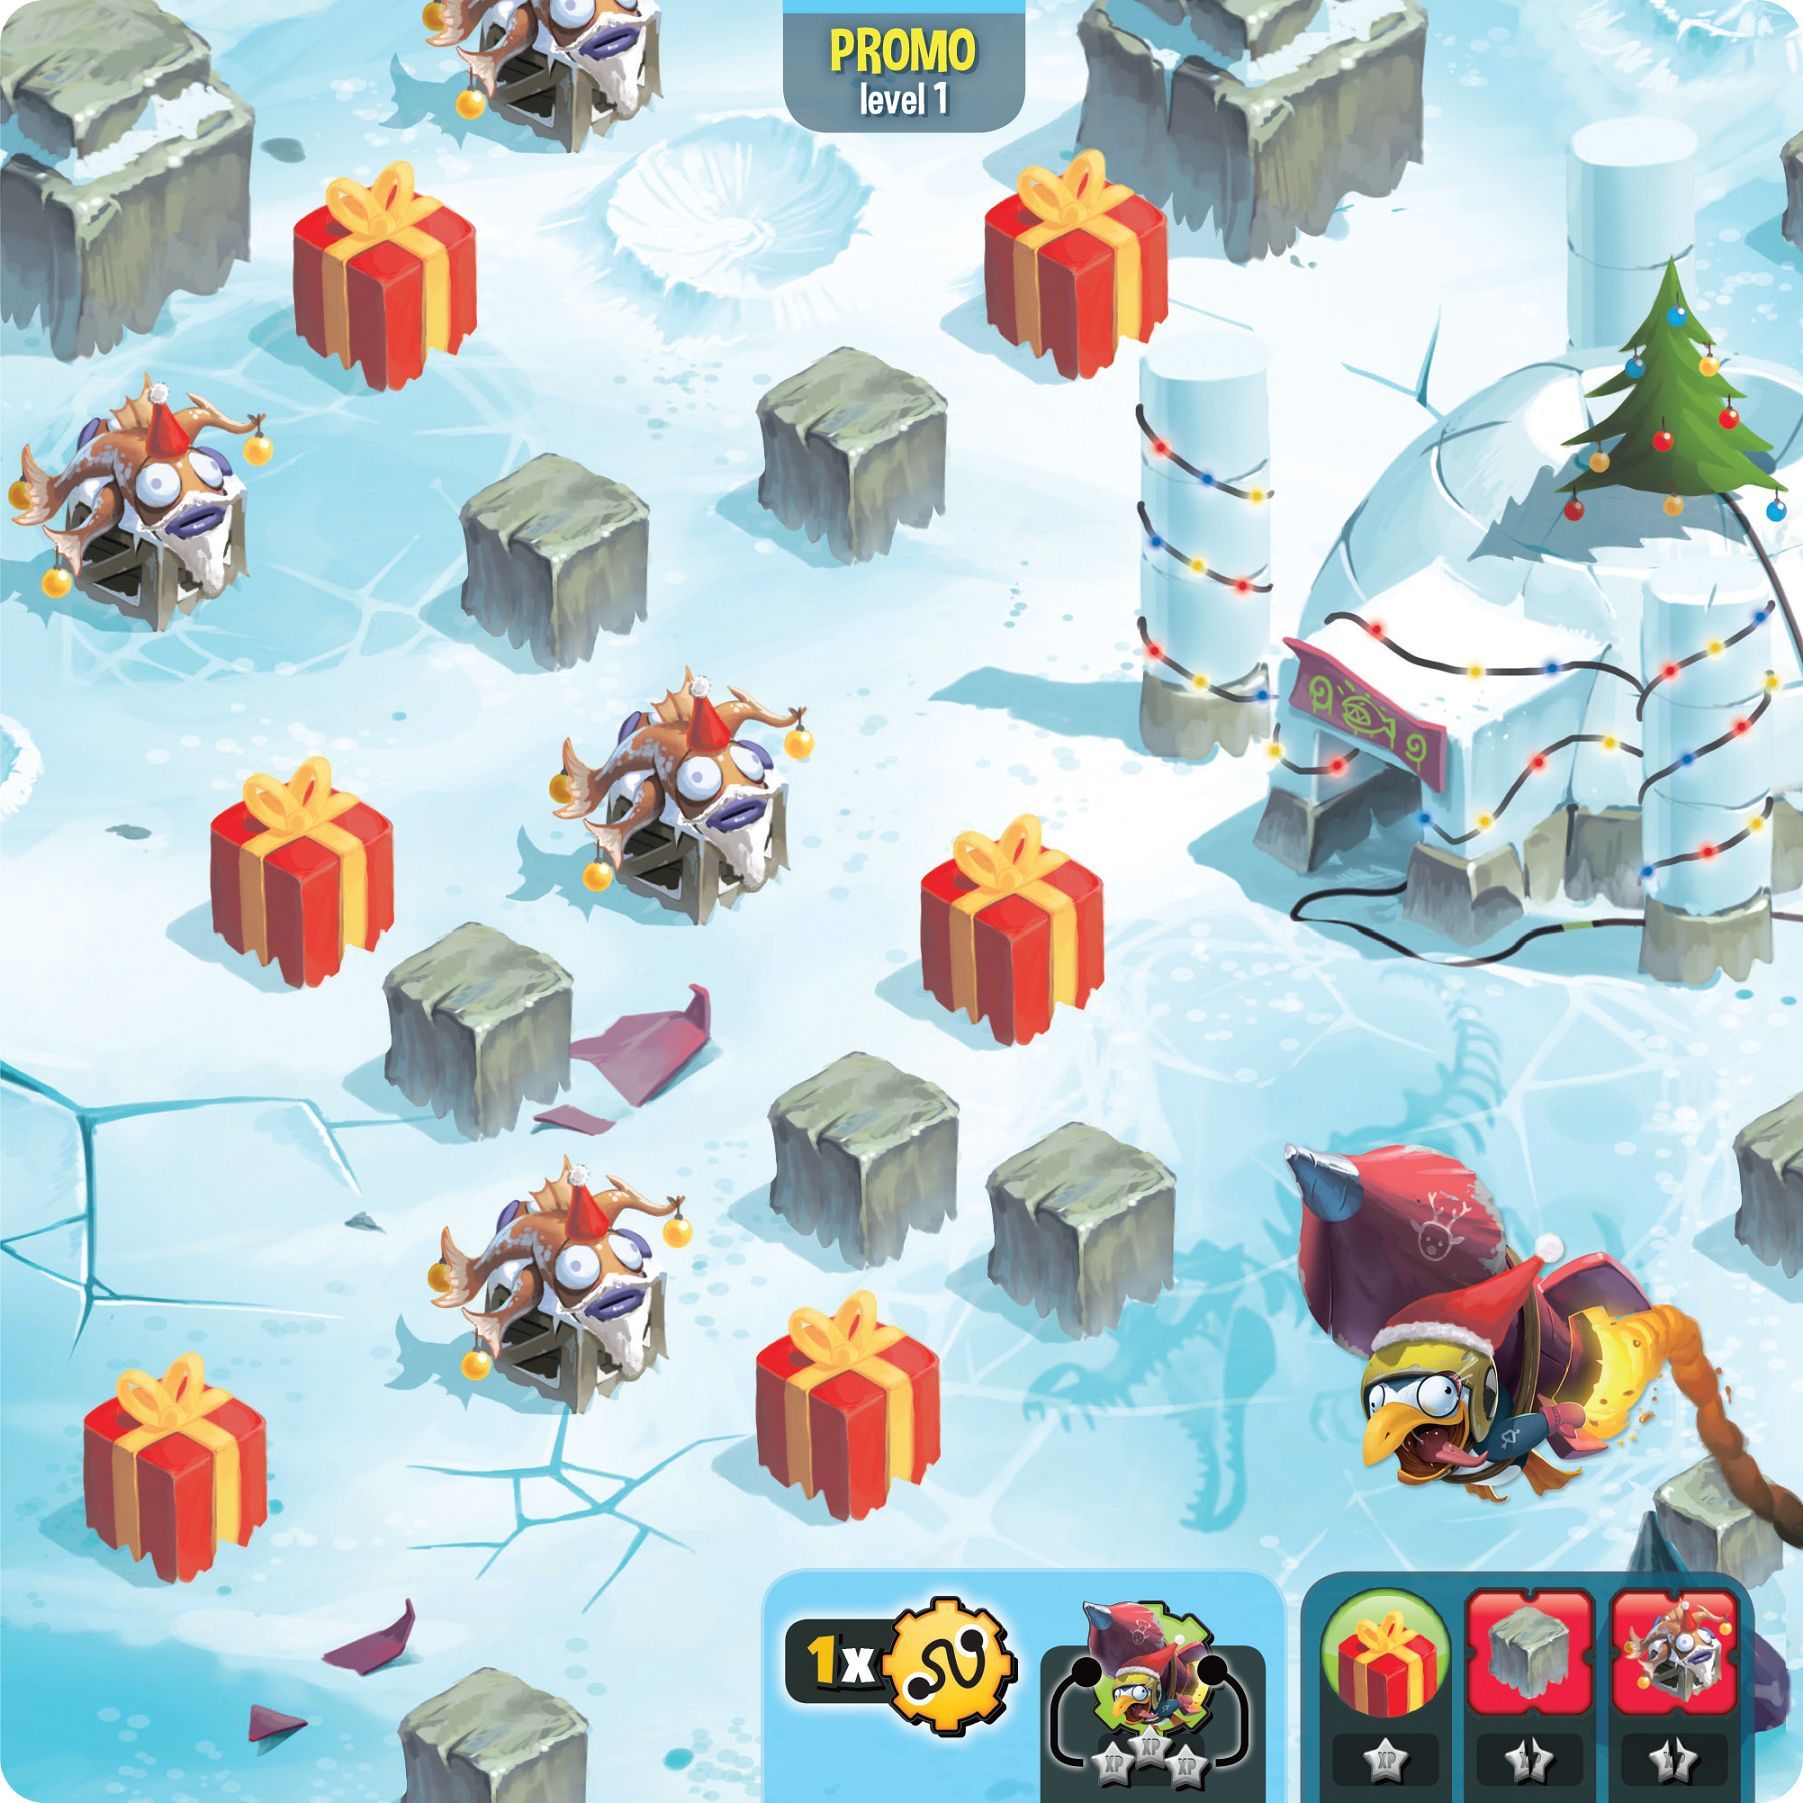 Loony Quest: Christmas Promo